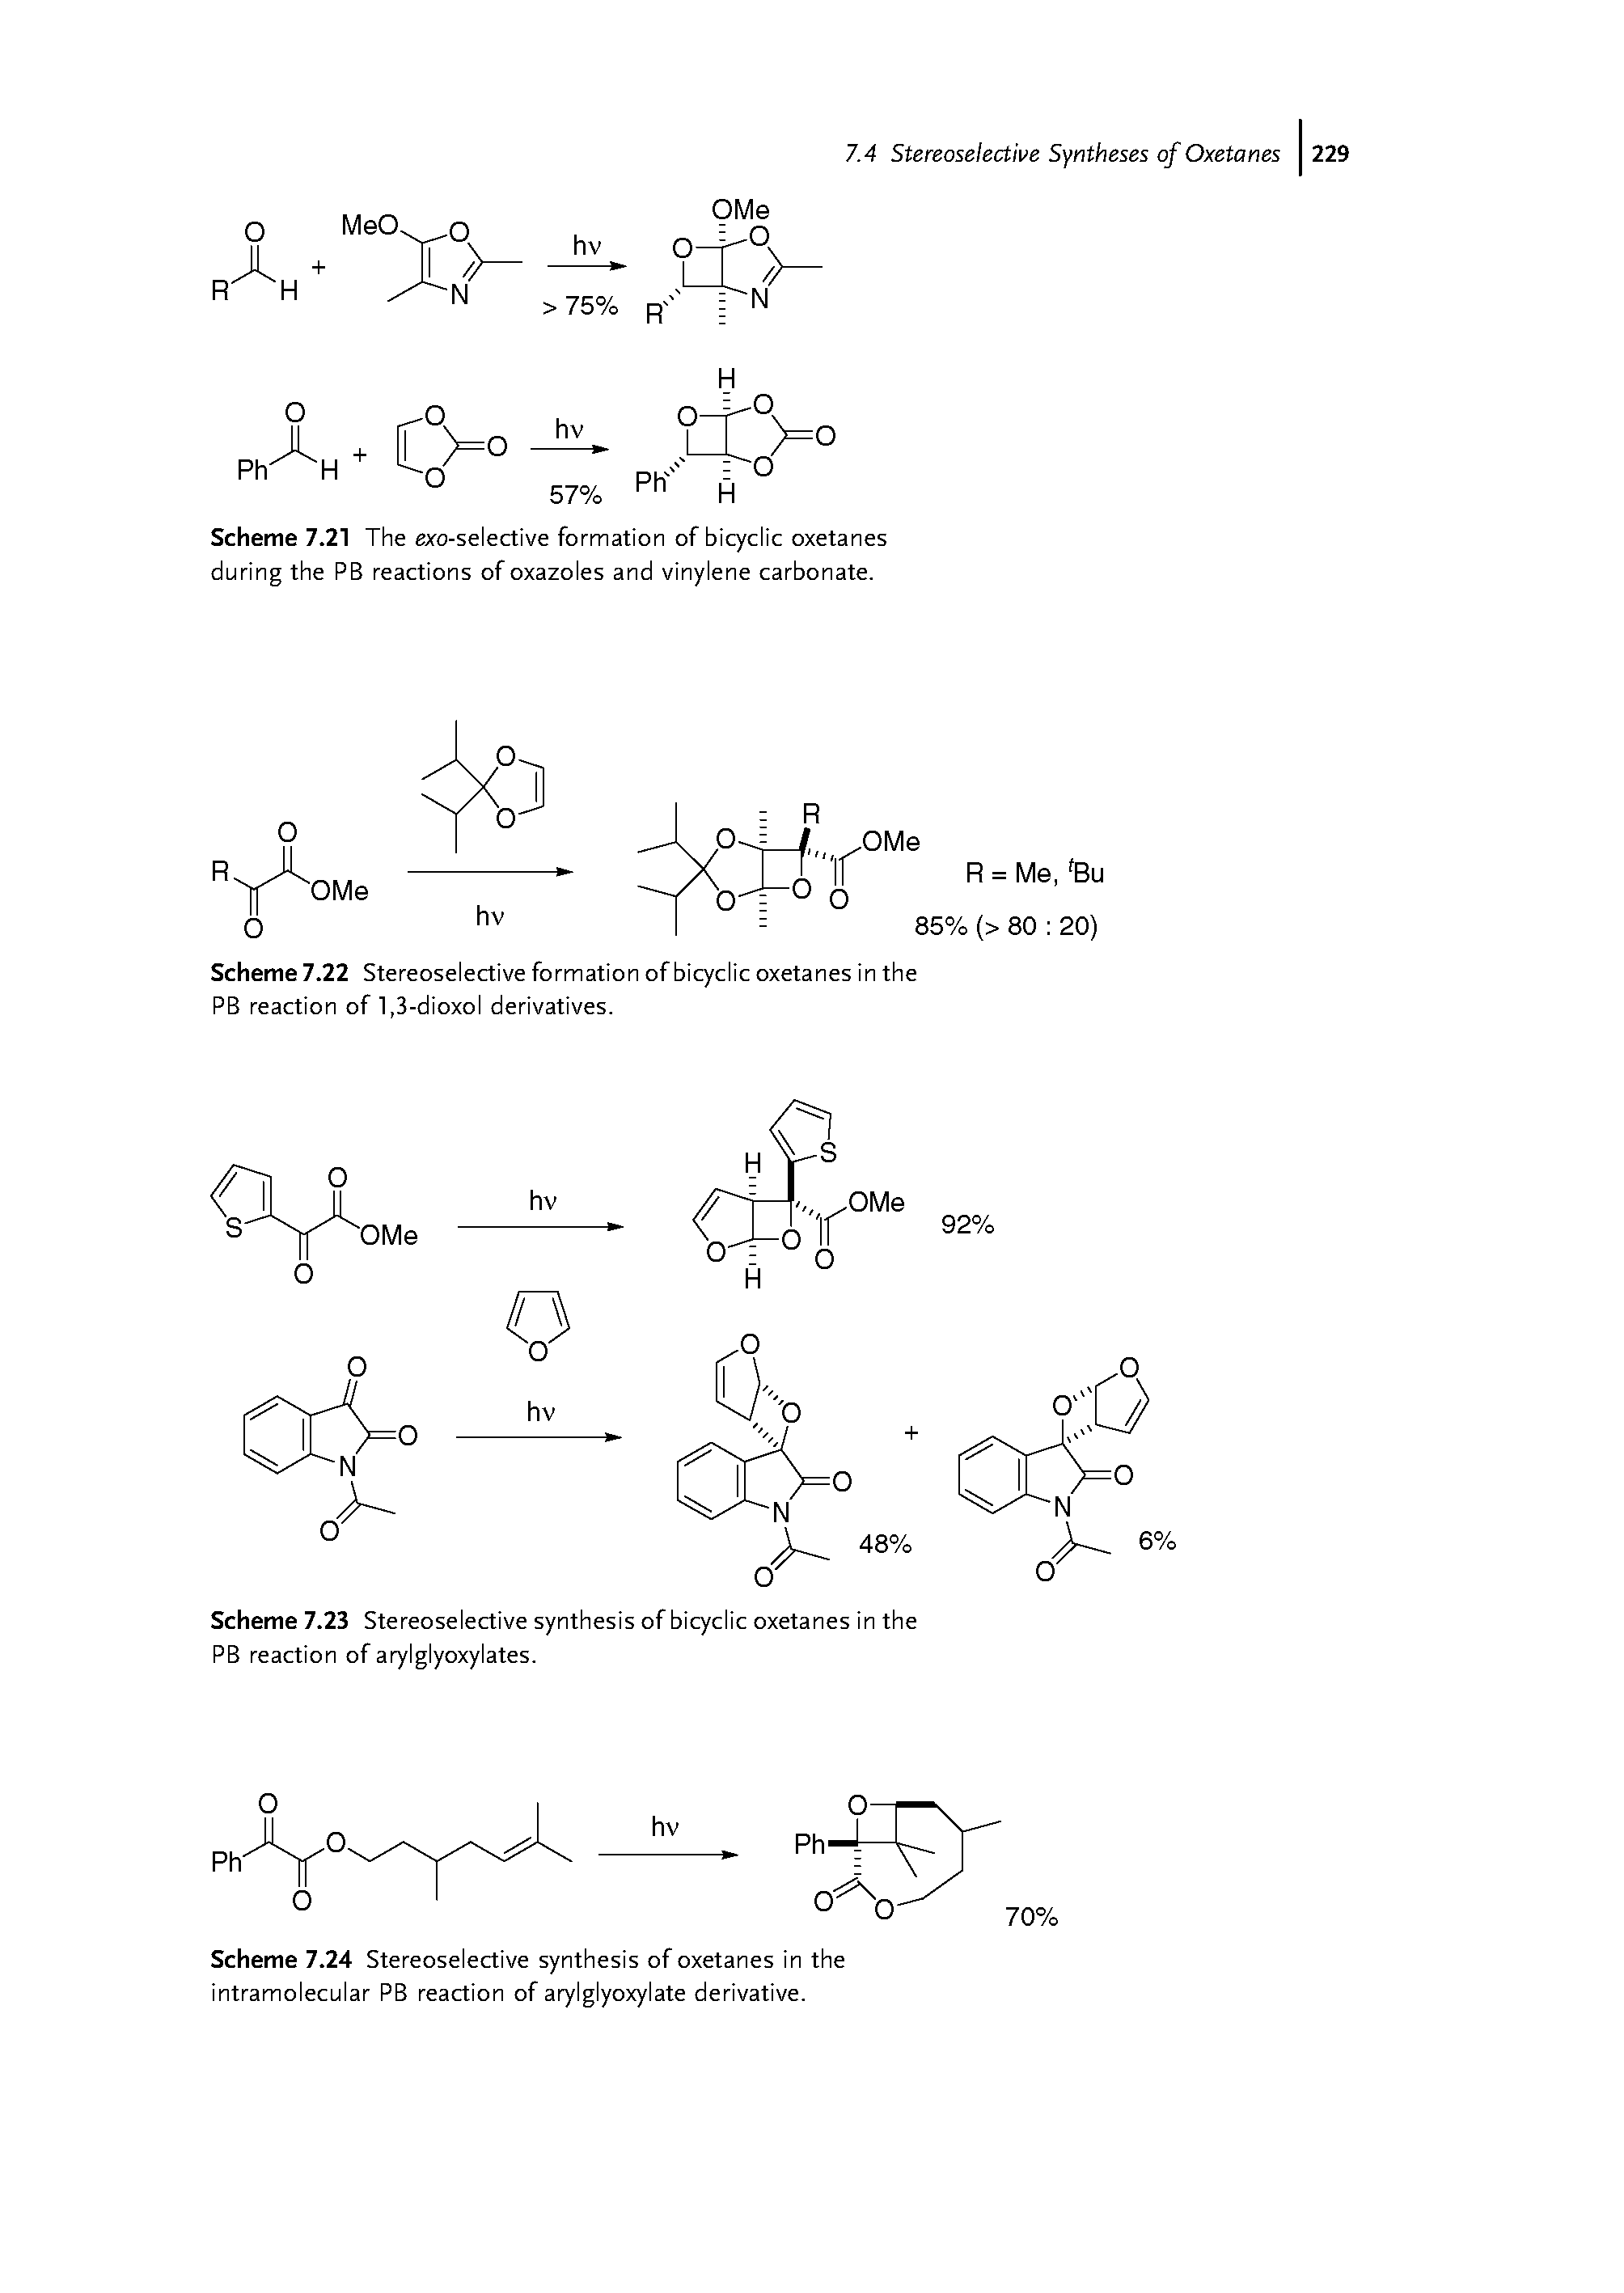 Scheme 7.22 Stereoselective formation of bicyclic oxetanes in the PB reaction of 1,3-dioxol derivatives.